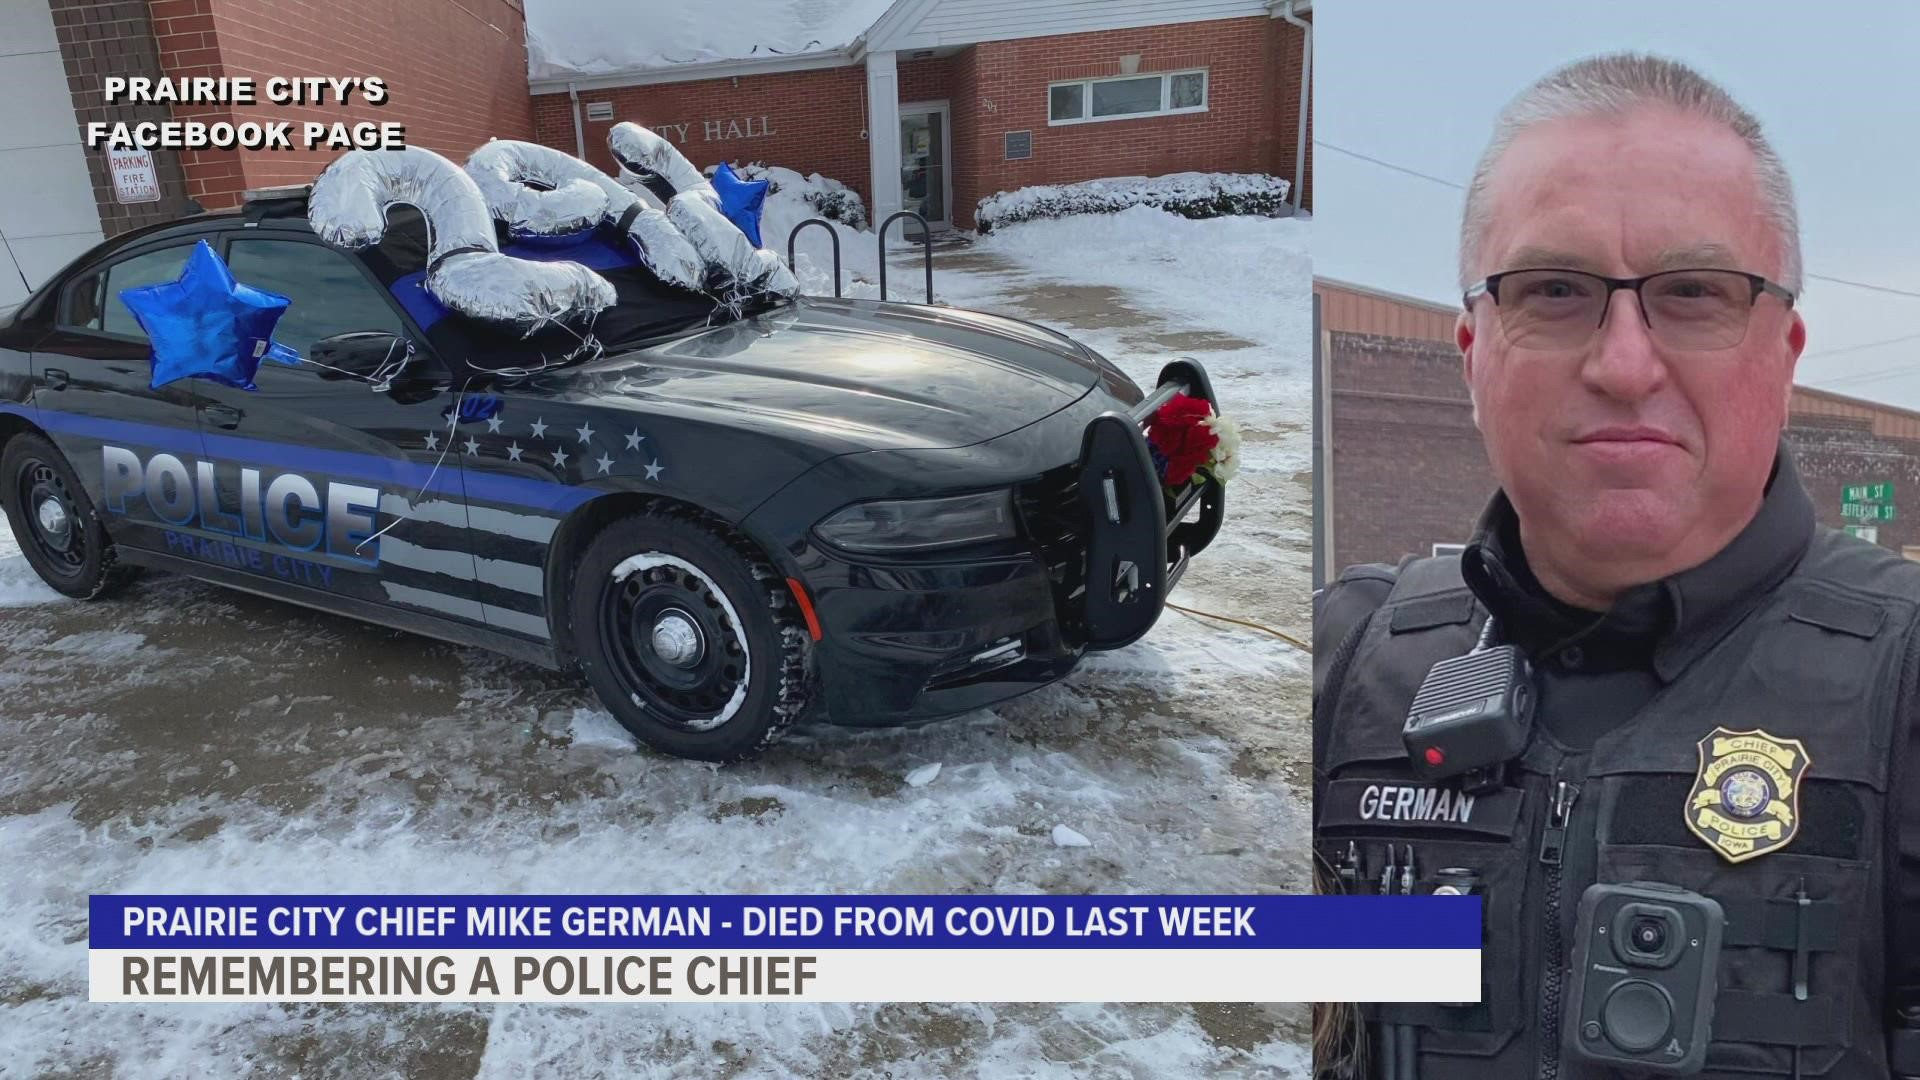 Chief Mike German had served the community since 2014.